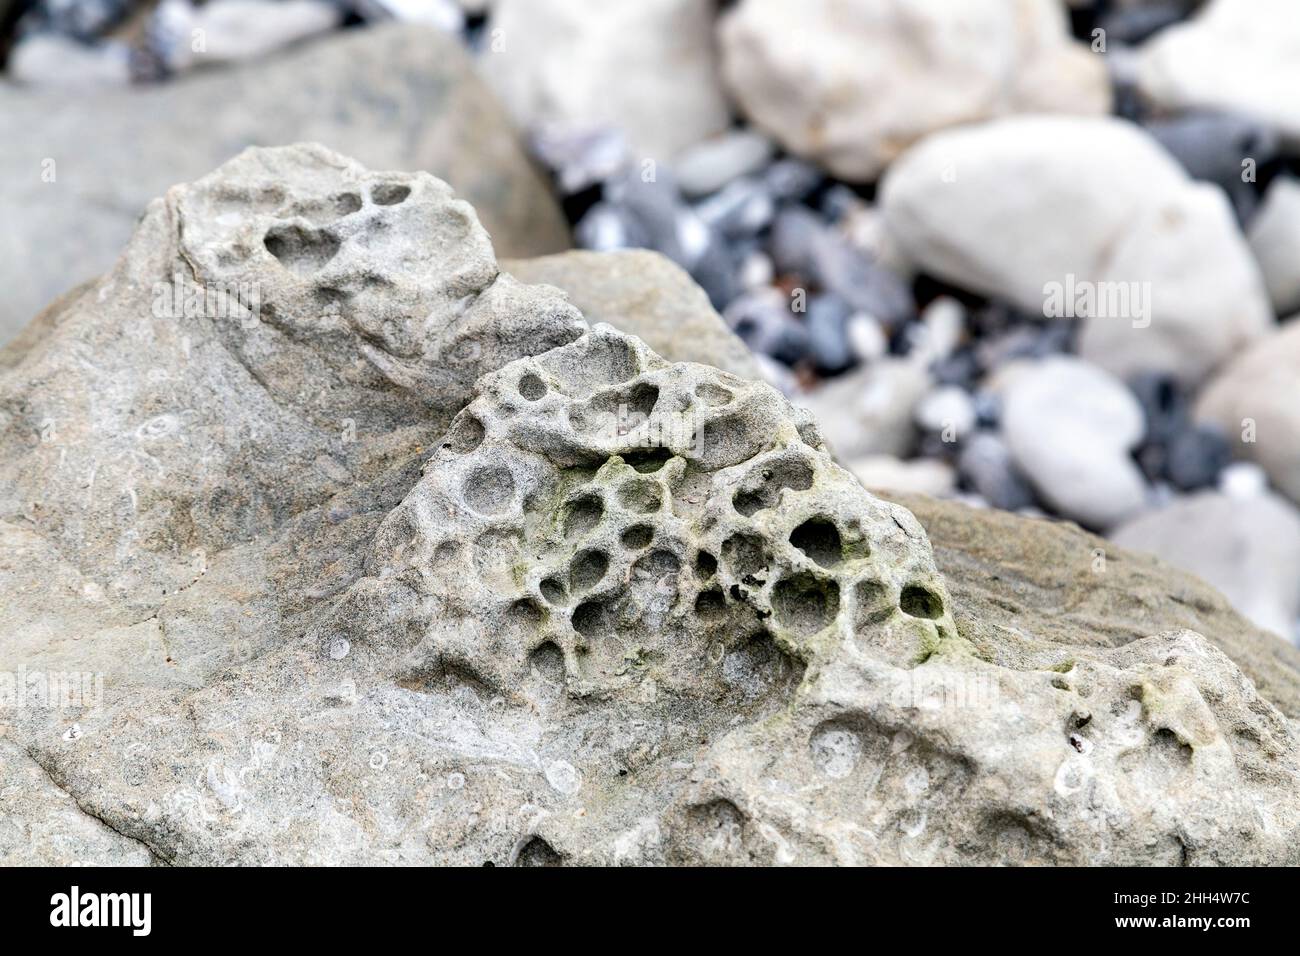 Sea sponge fossils in a rock at Beachy Head, Eastbourne, UK Stock Photo